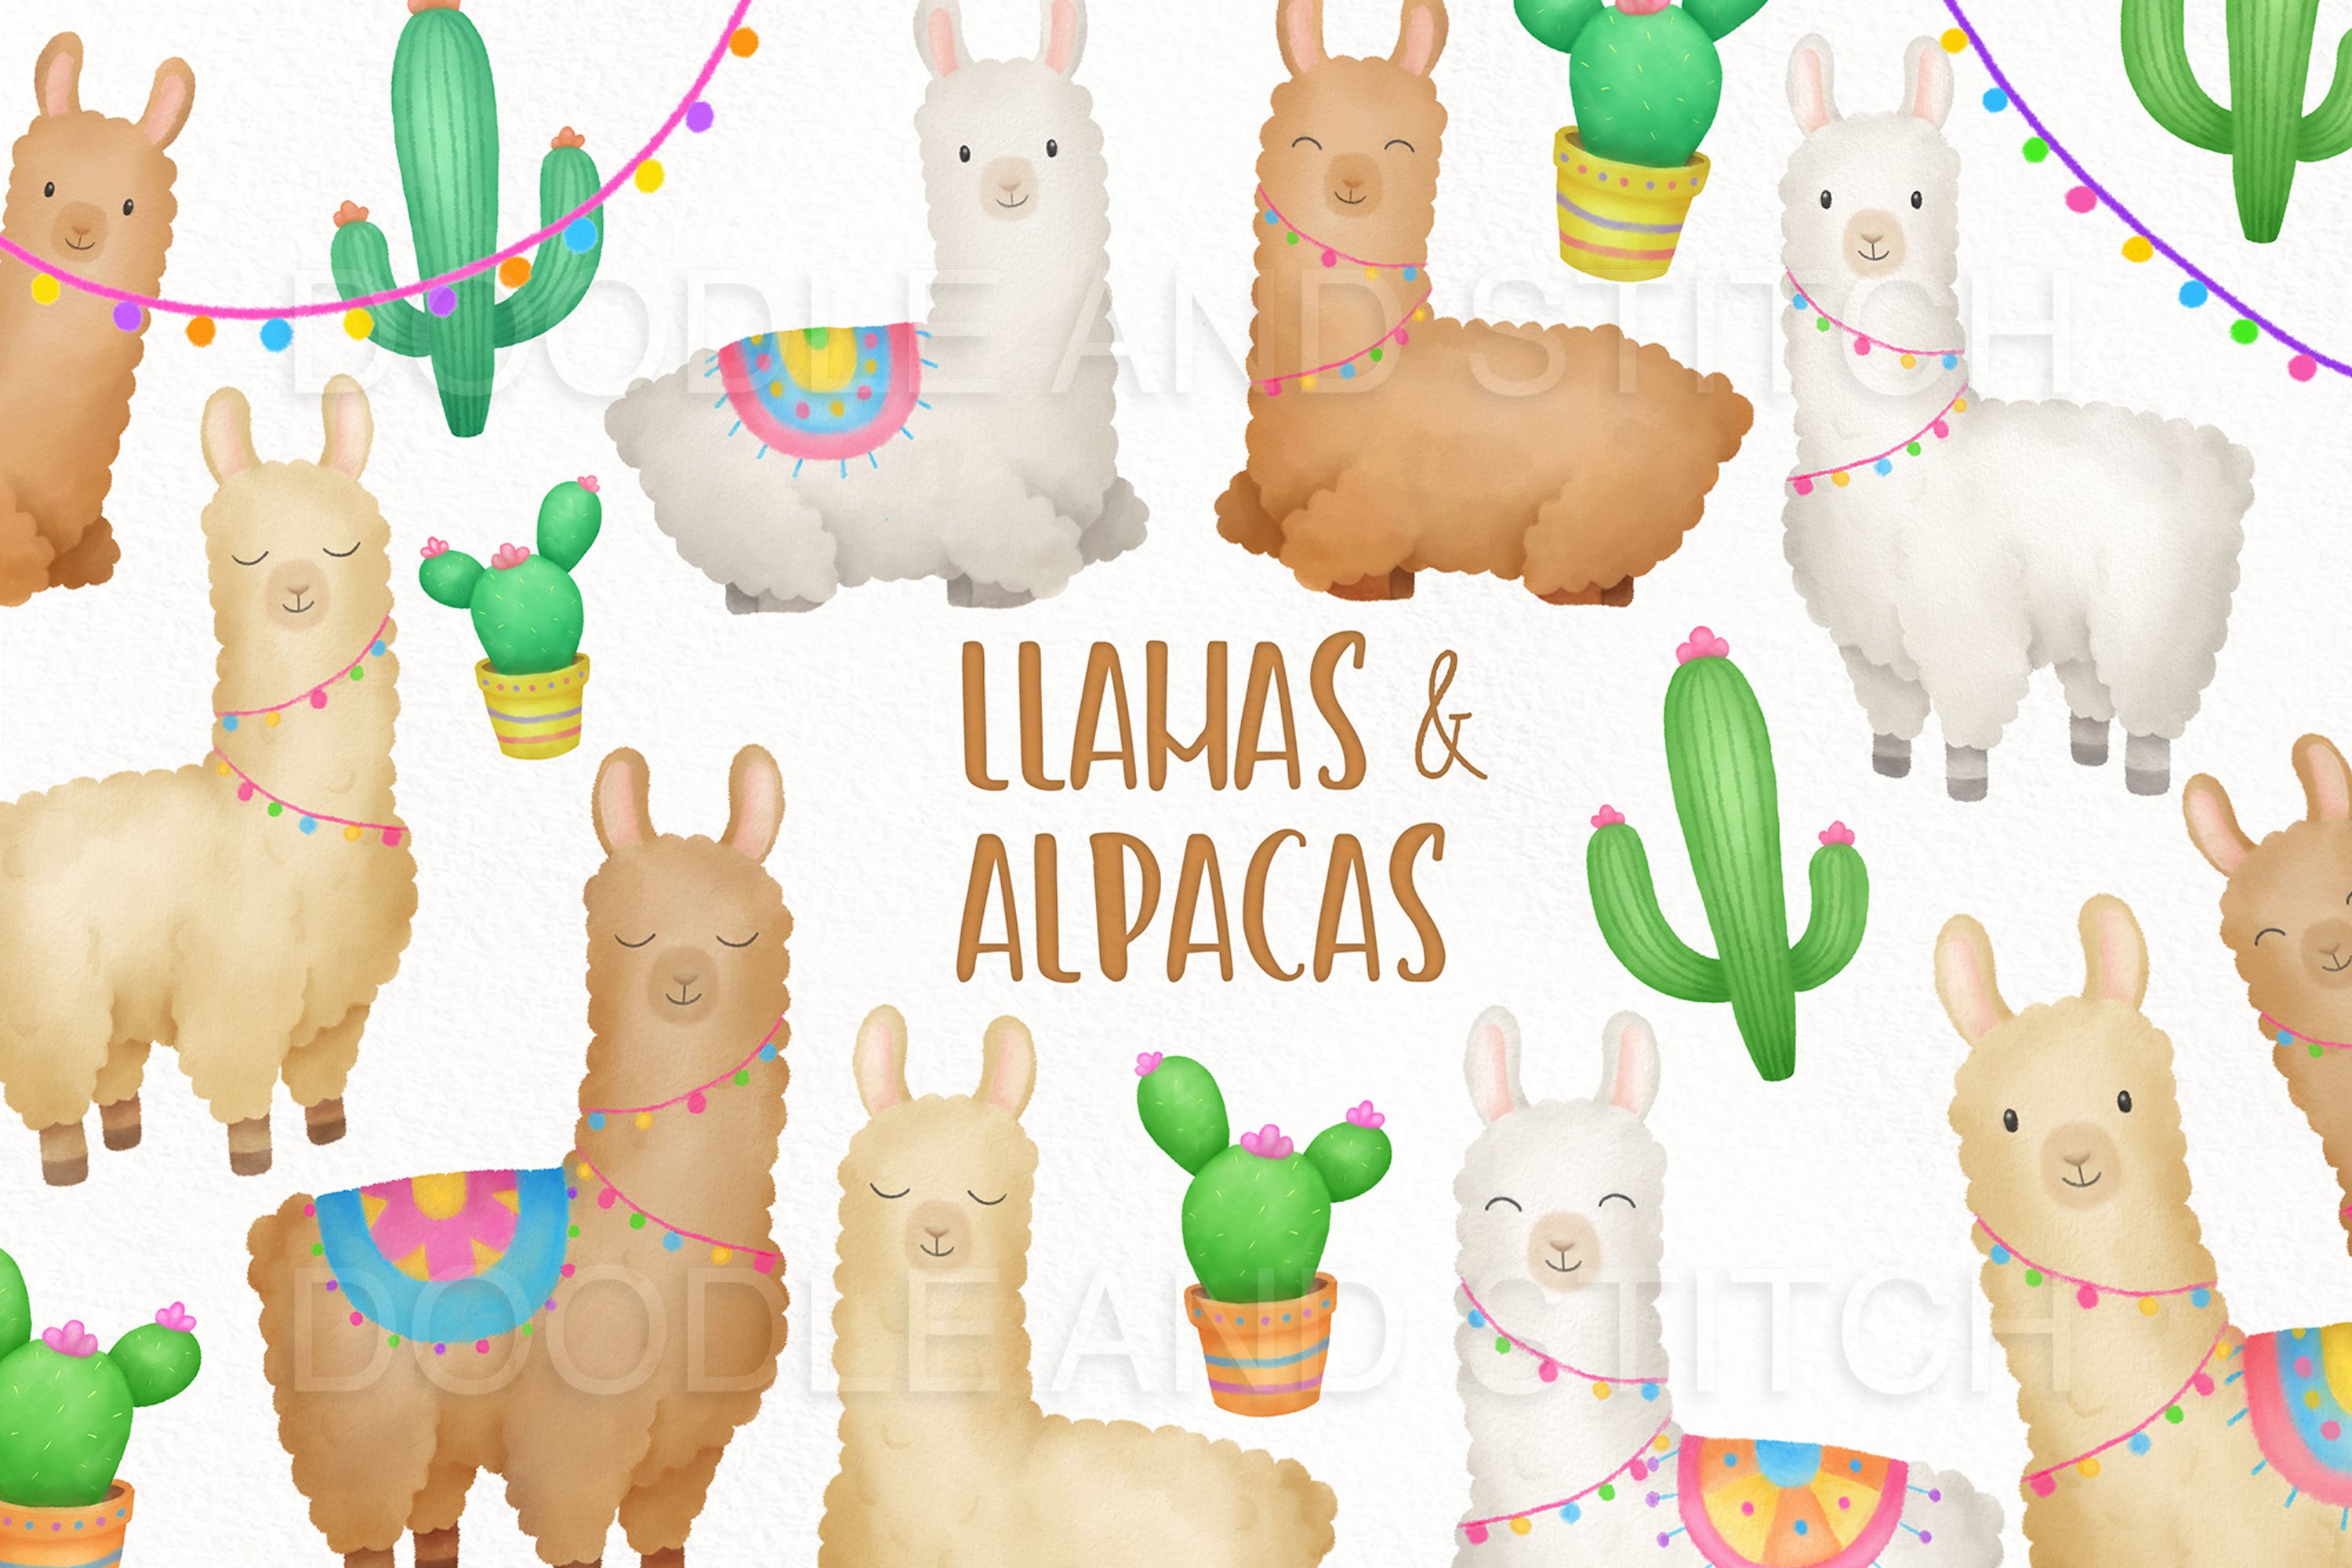 Llama and Alpacas Illustrations cover image.